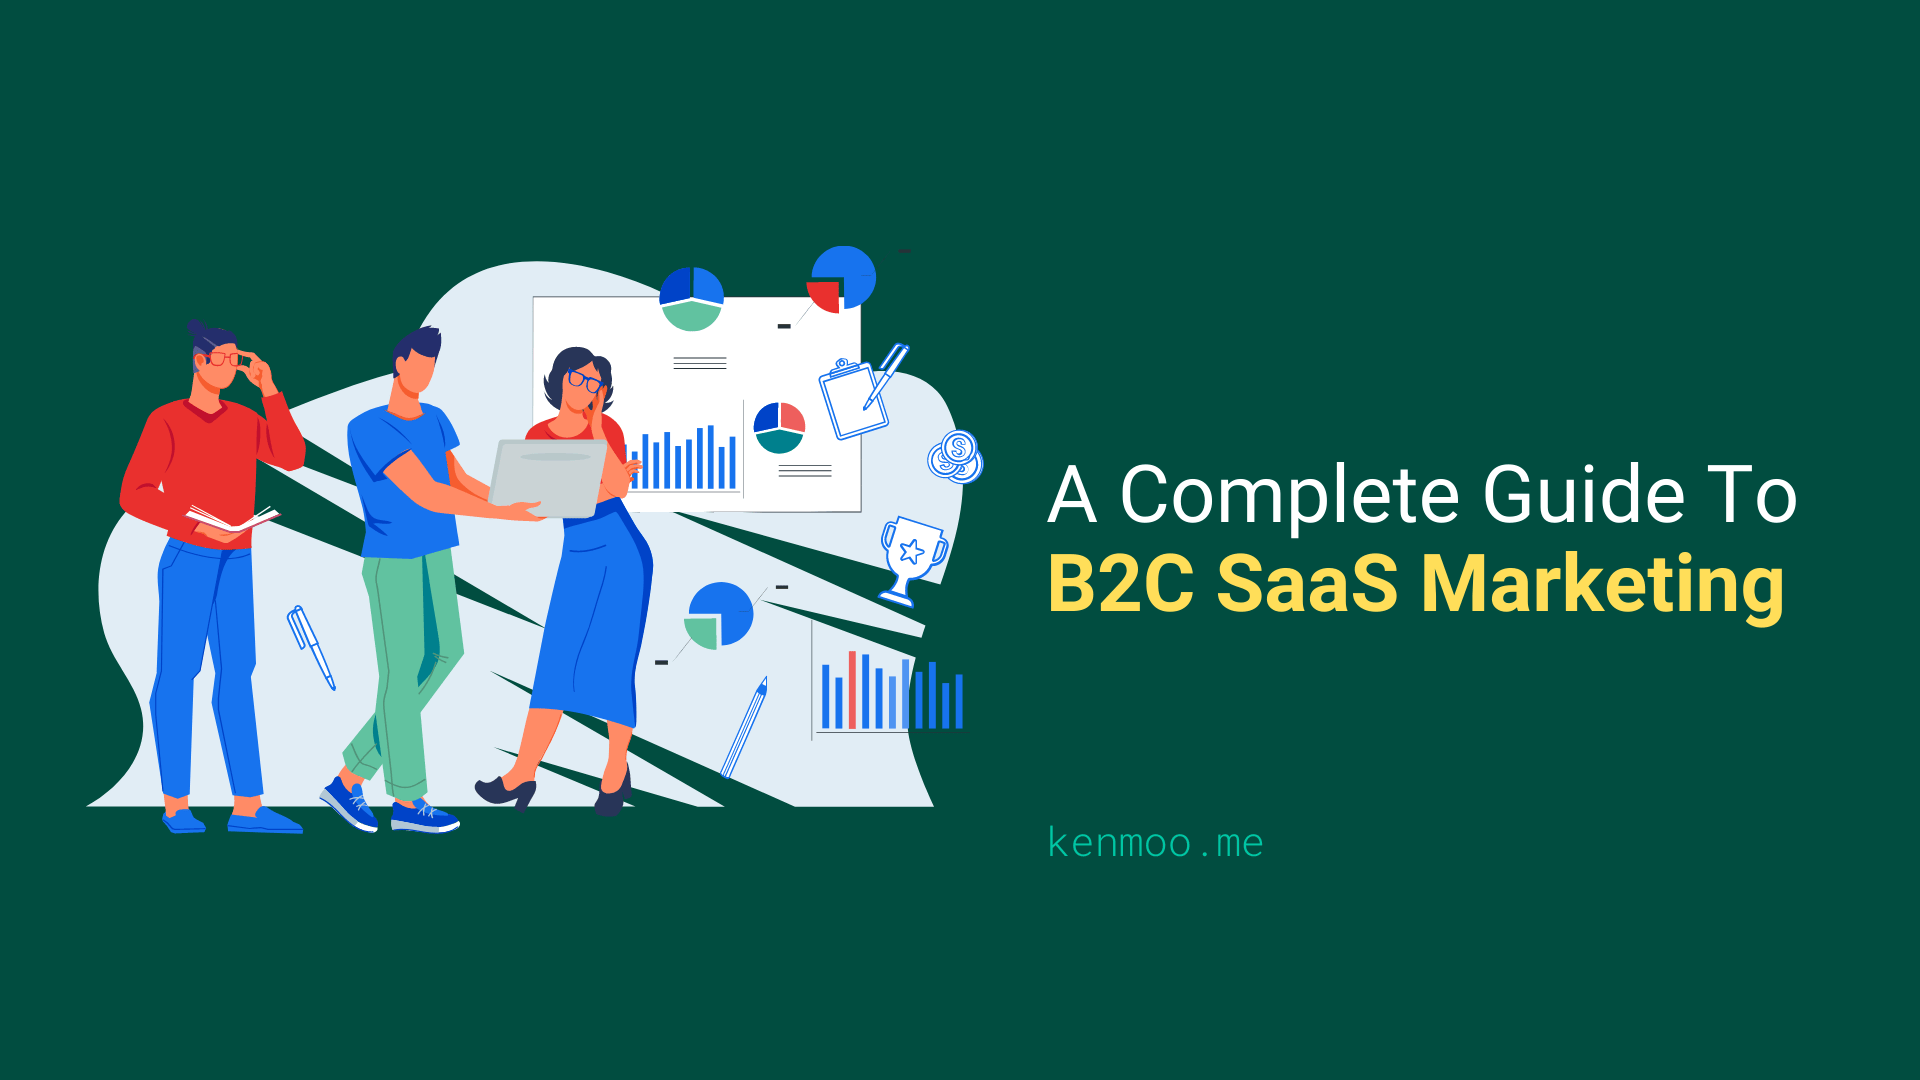 A Complete Guide To B2C SaaS Marketing